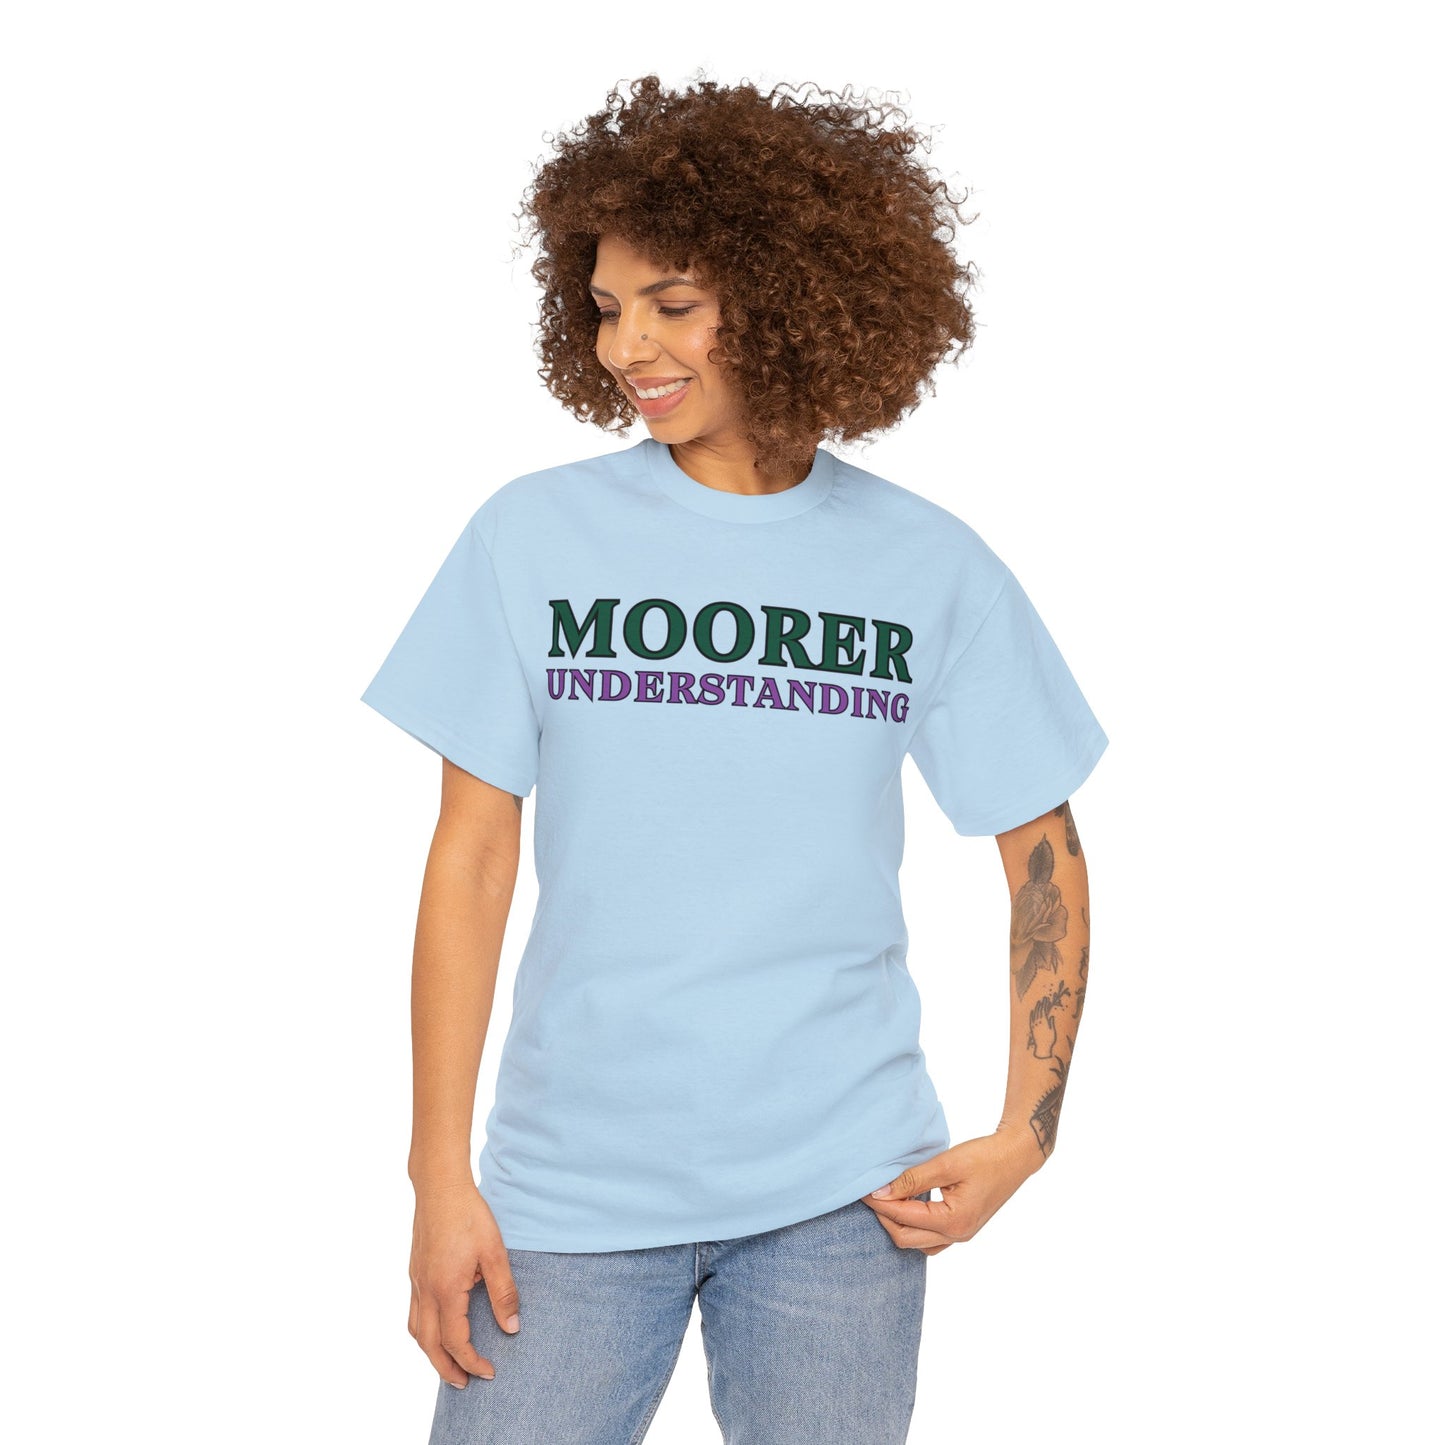 MMUnderstanding T-shirt (Be Moorer Special Collection)